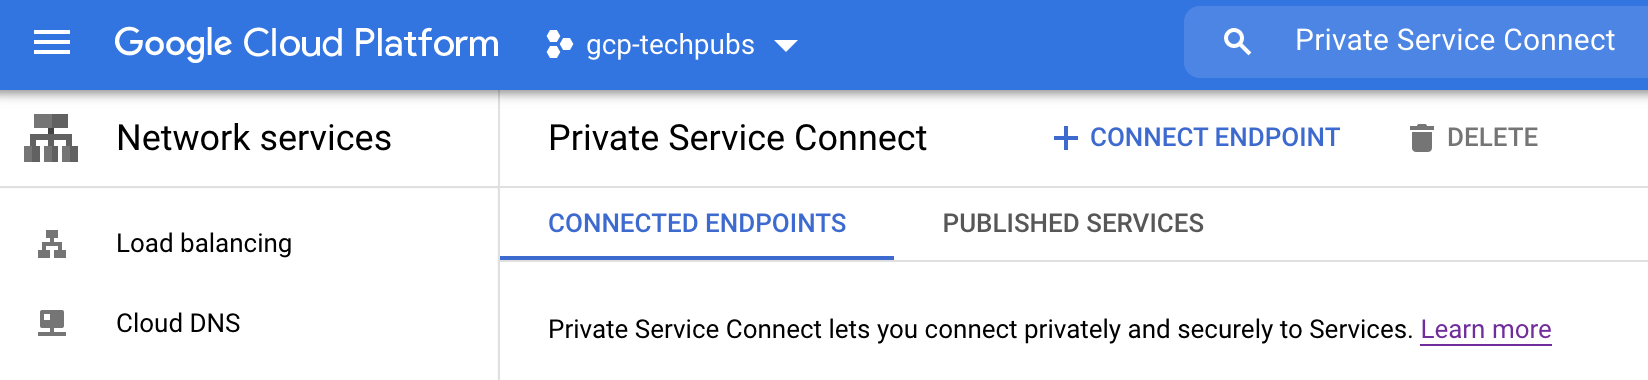 Google Cloud Private Connect Service with no endpoint created yet